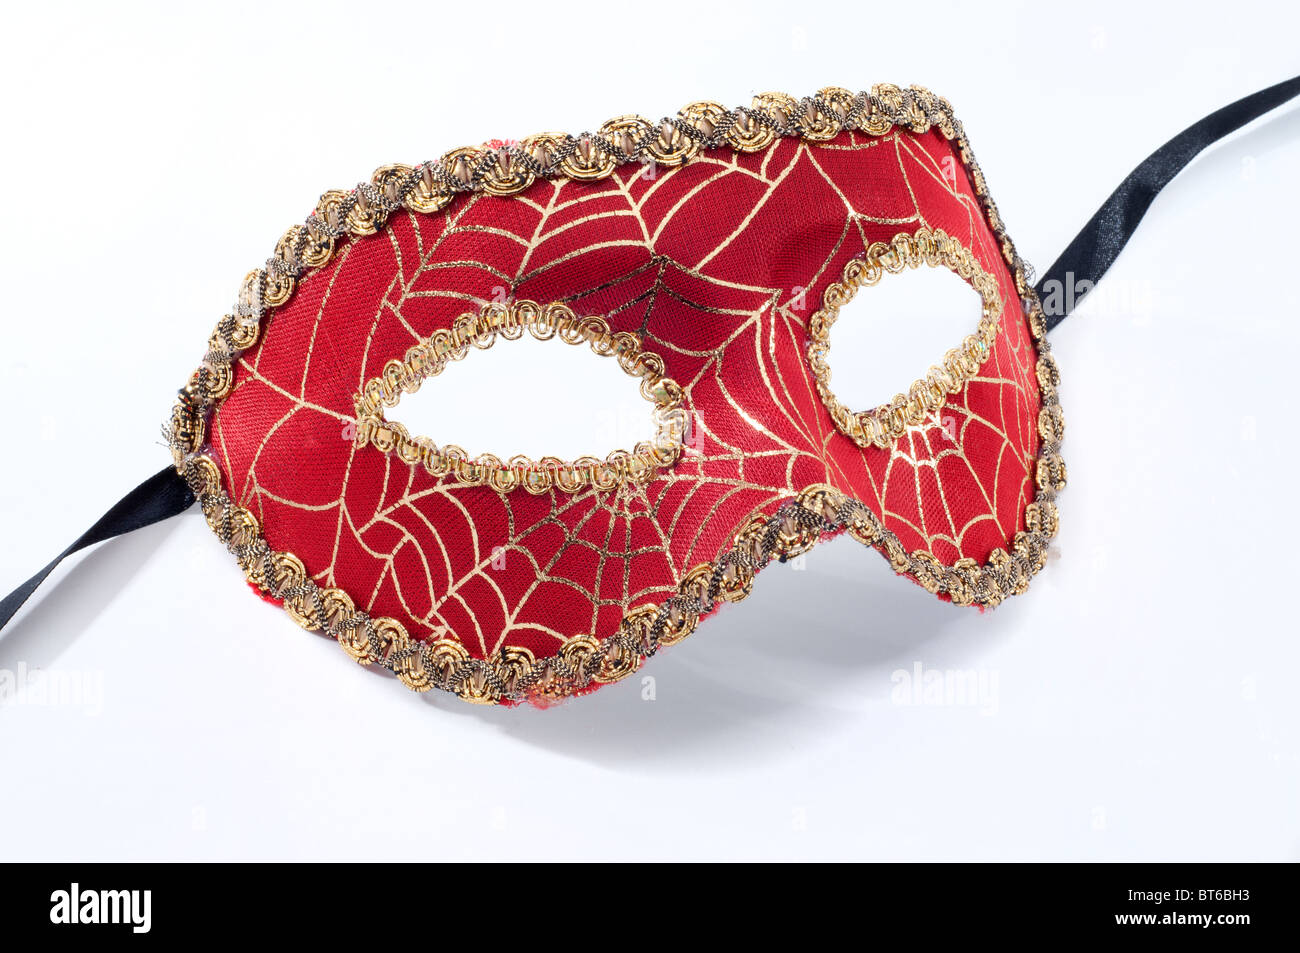 Decorative Masquerade Ball Mask With A Spiders Web Design In Red And Gold Stock Photo